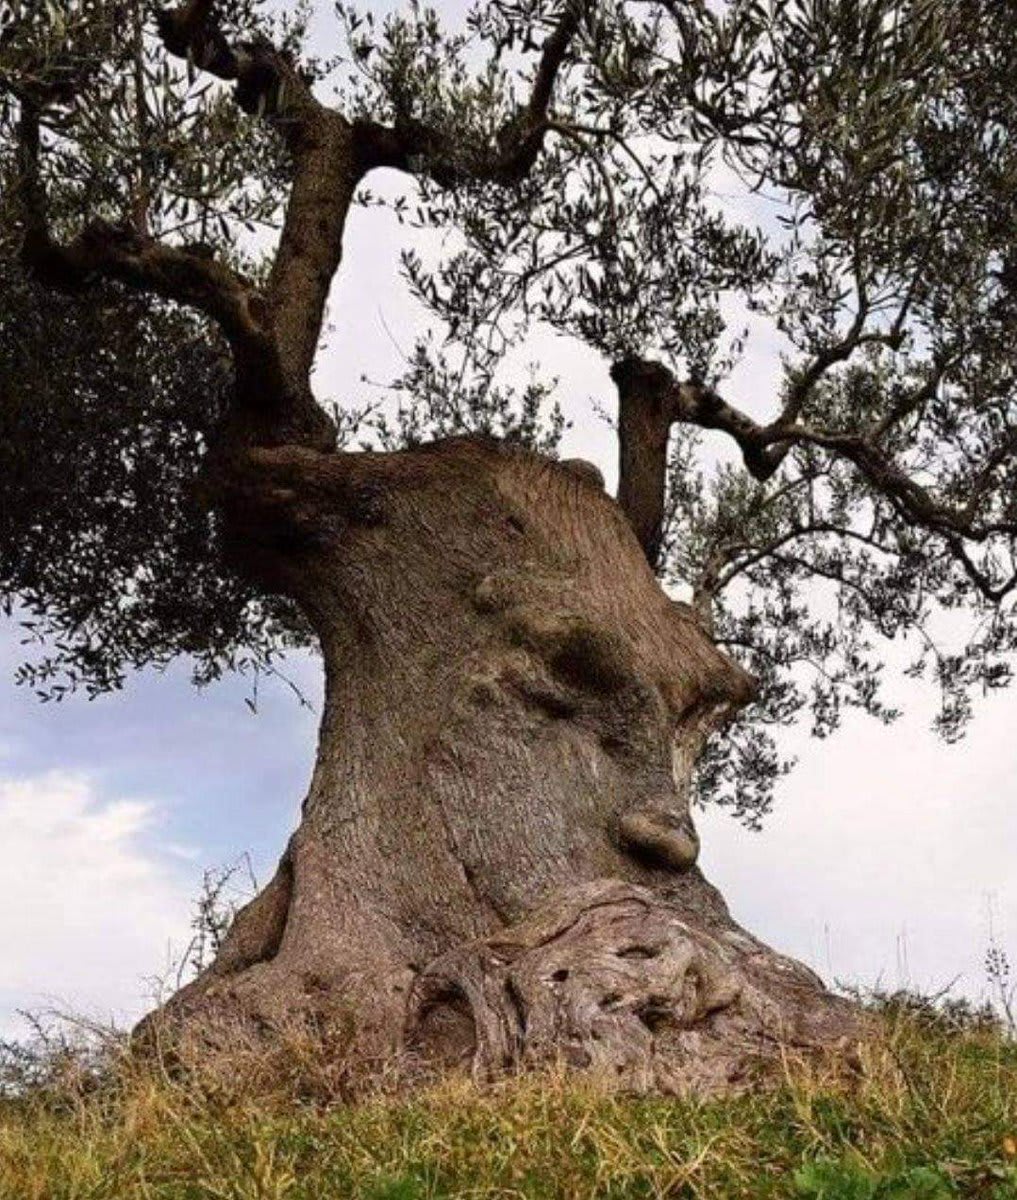 An Ancient Olive Tree In Puglia Italy Over 1500 Years Old 4823